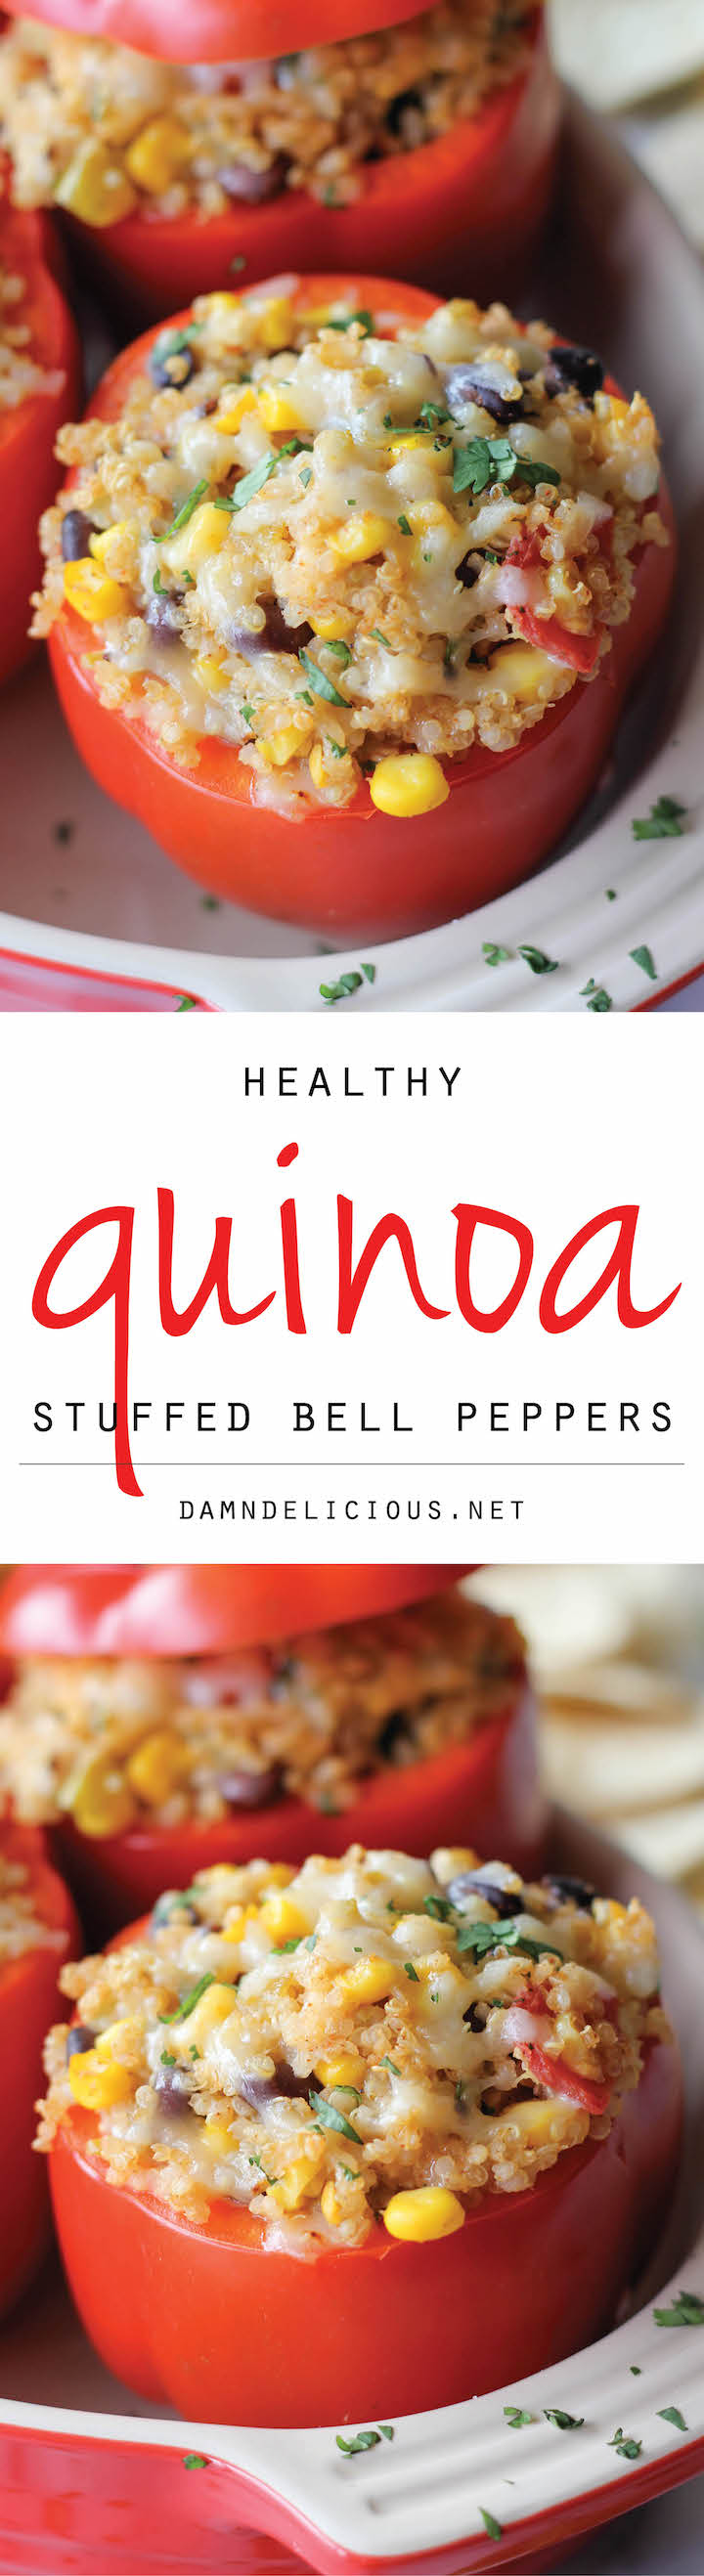 Quinoa Stuffed Bell Peppers - These stuffed bell peppers will provide the nutrition that you need for a healthy, balanced meal!